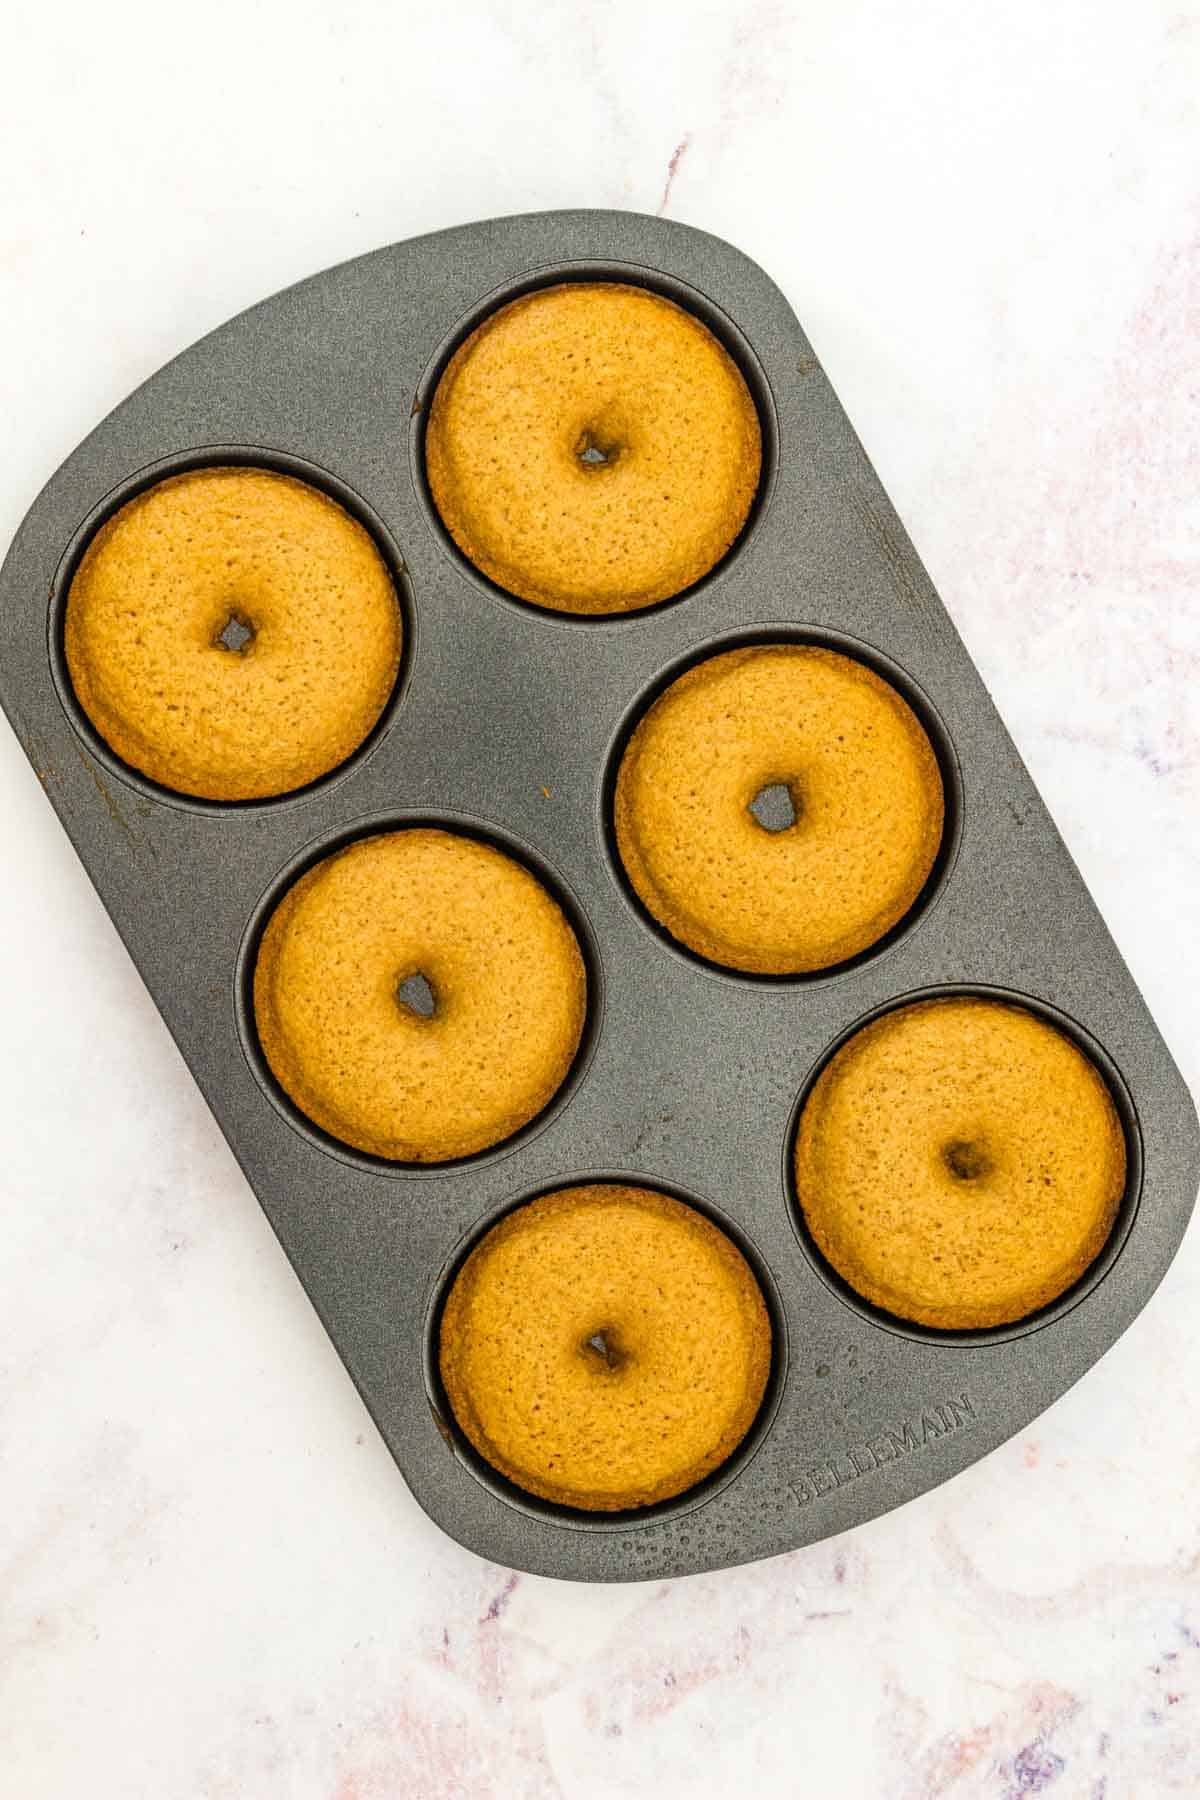 Baked gluten free apple cider donuts in a donut pan.